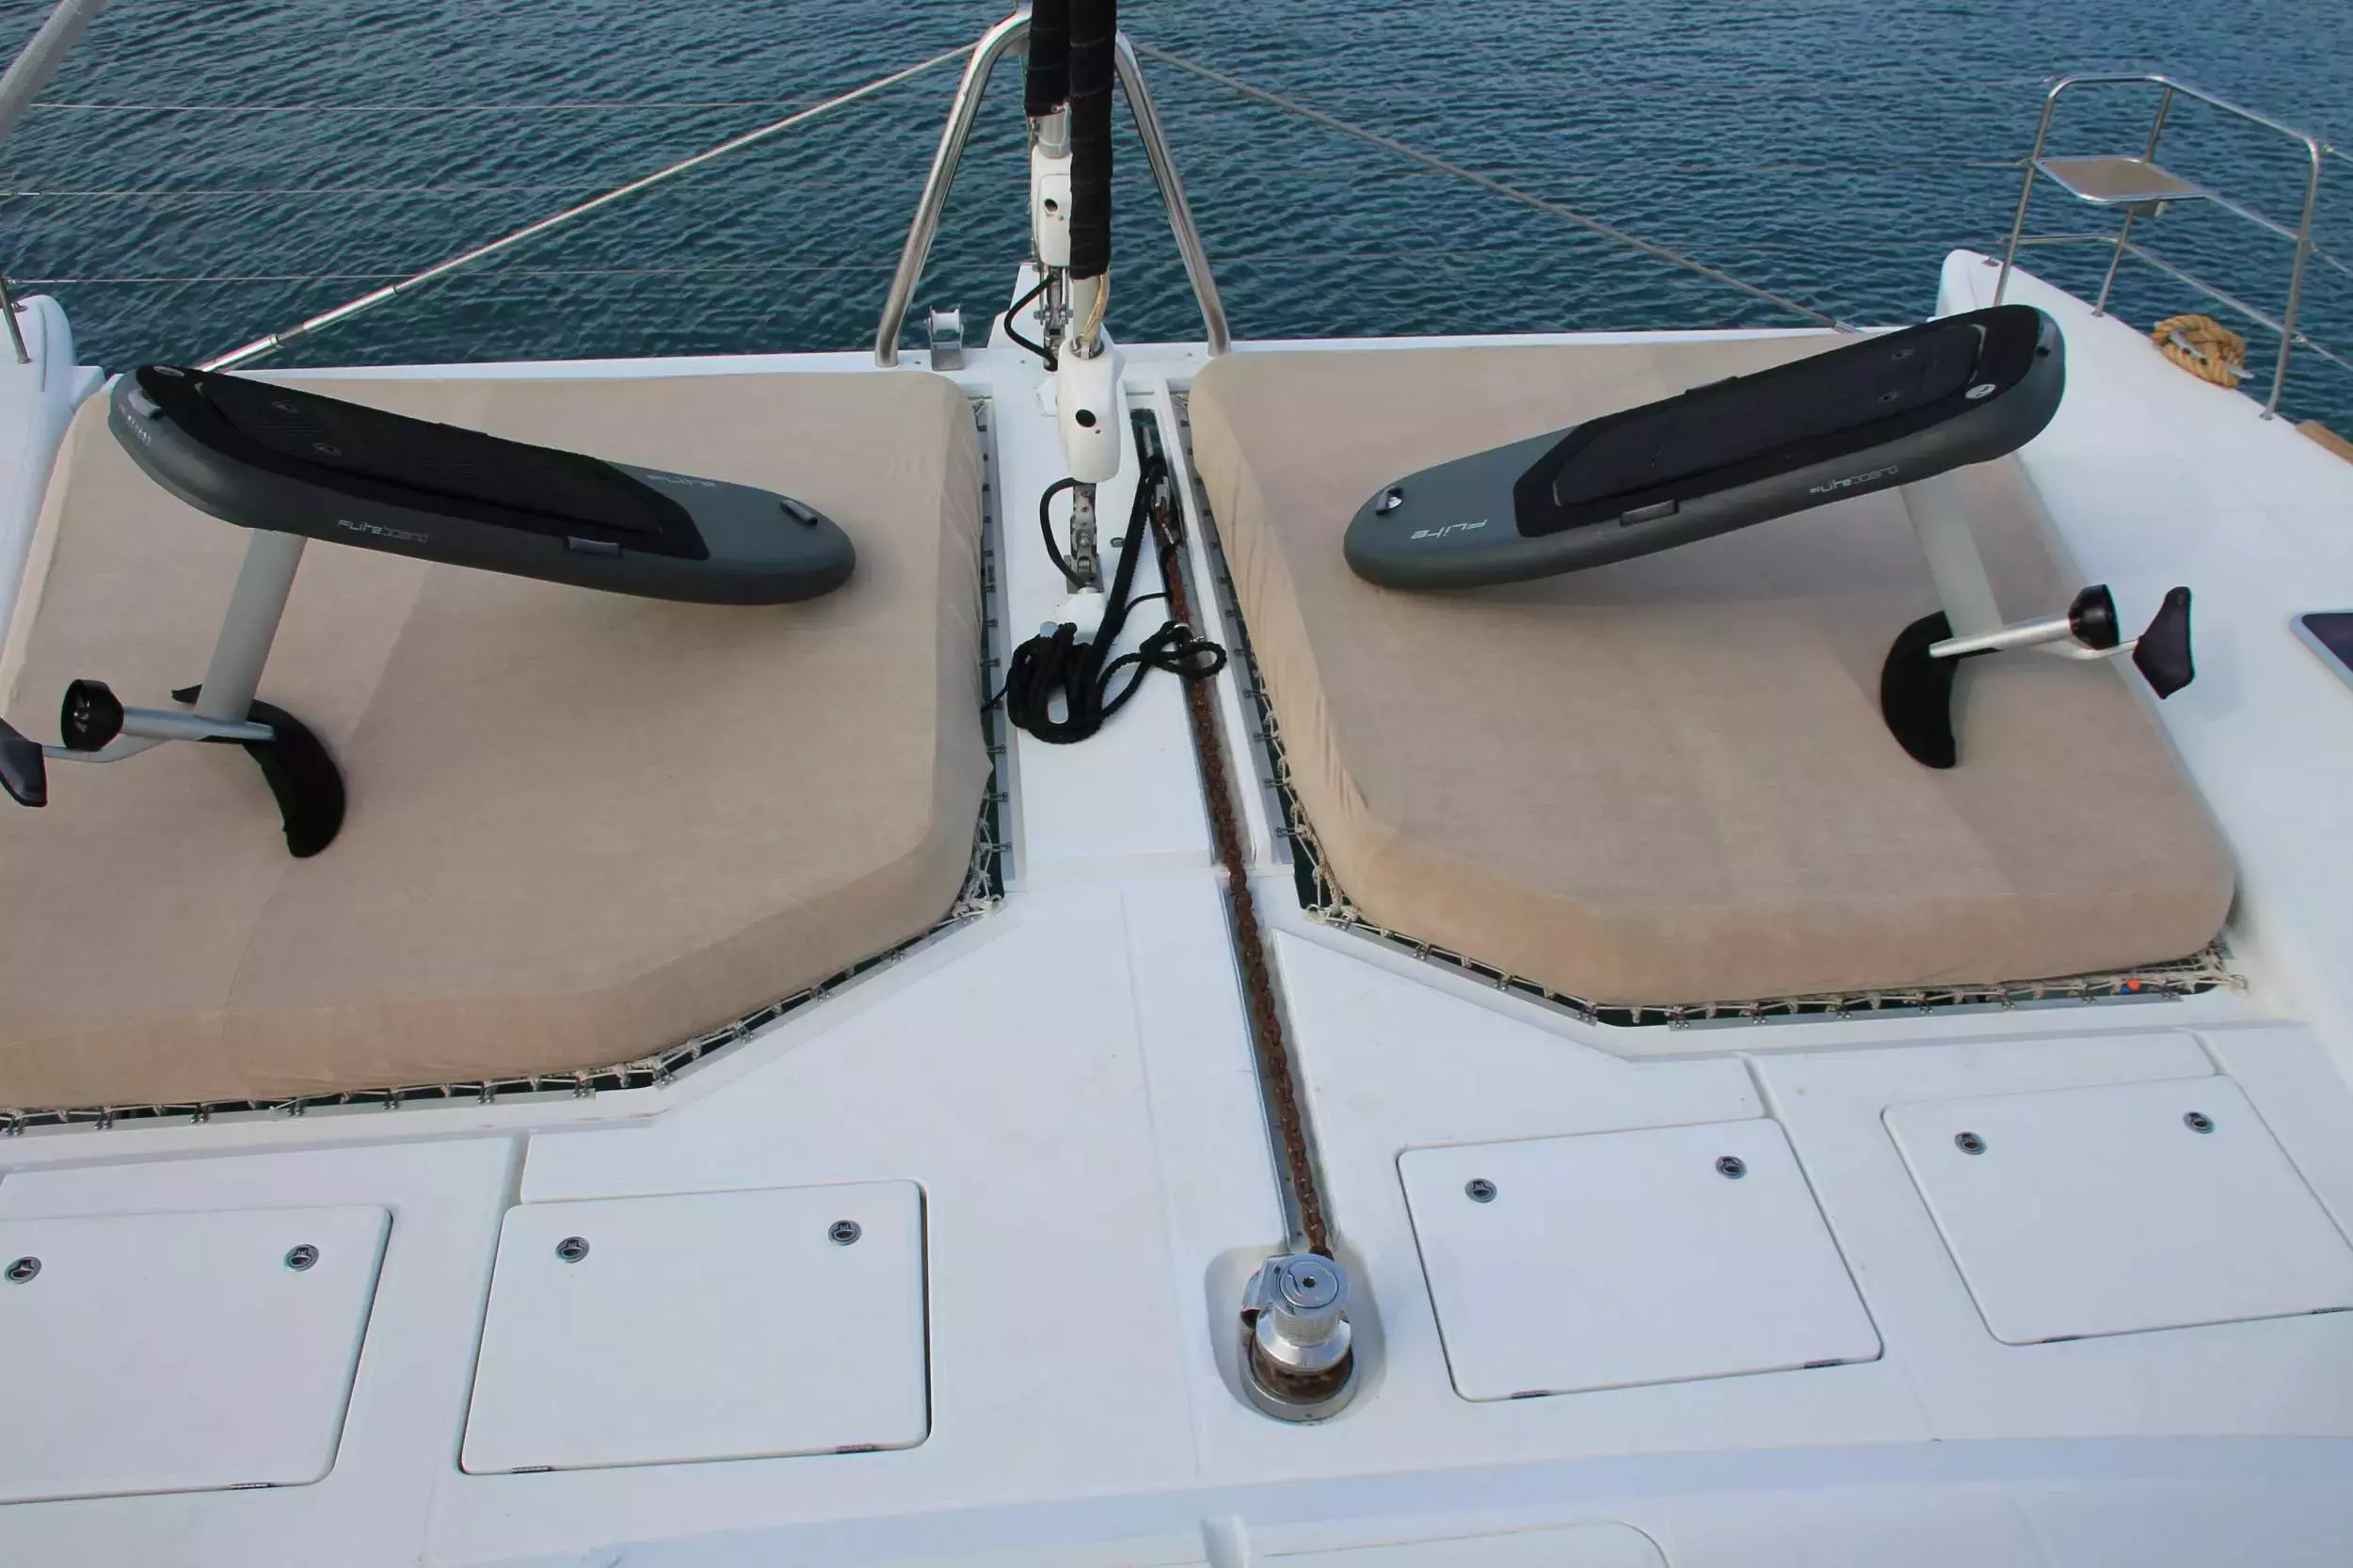 Jarana by Lagoon - Special Offer for a private Sailing Catamaran Rental in St Georges with a crew